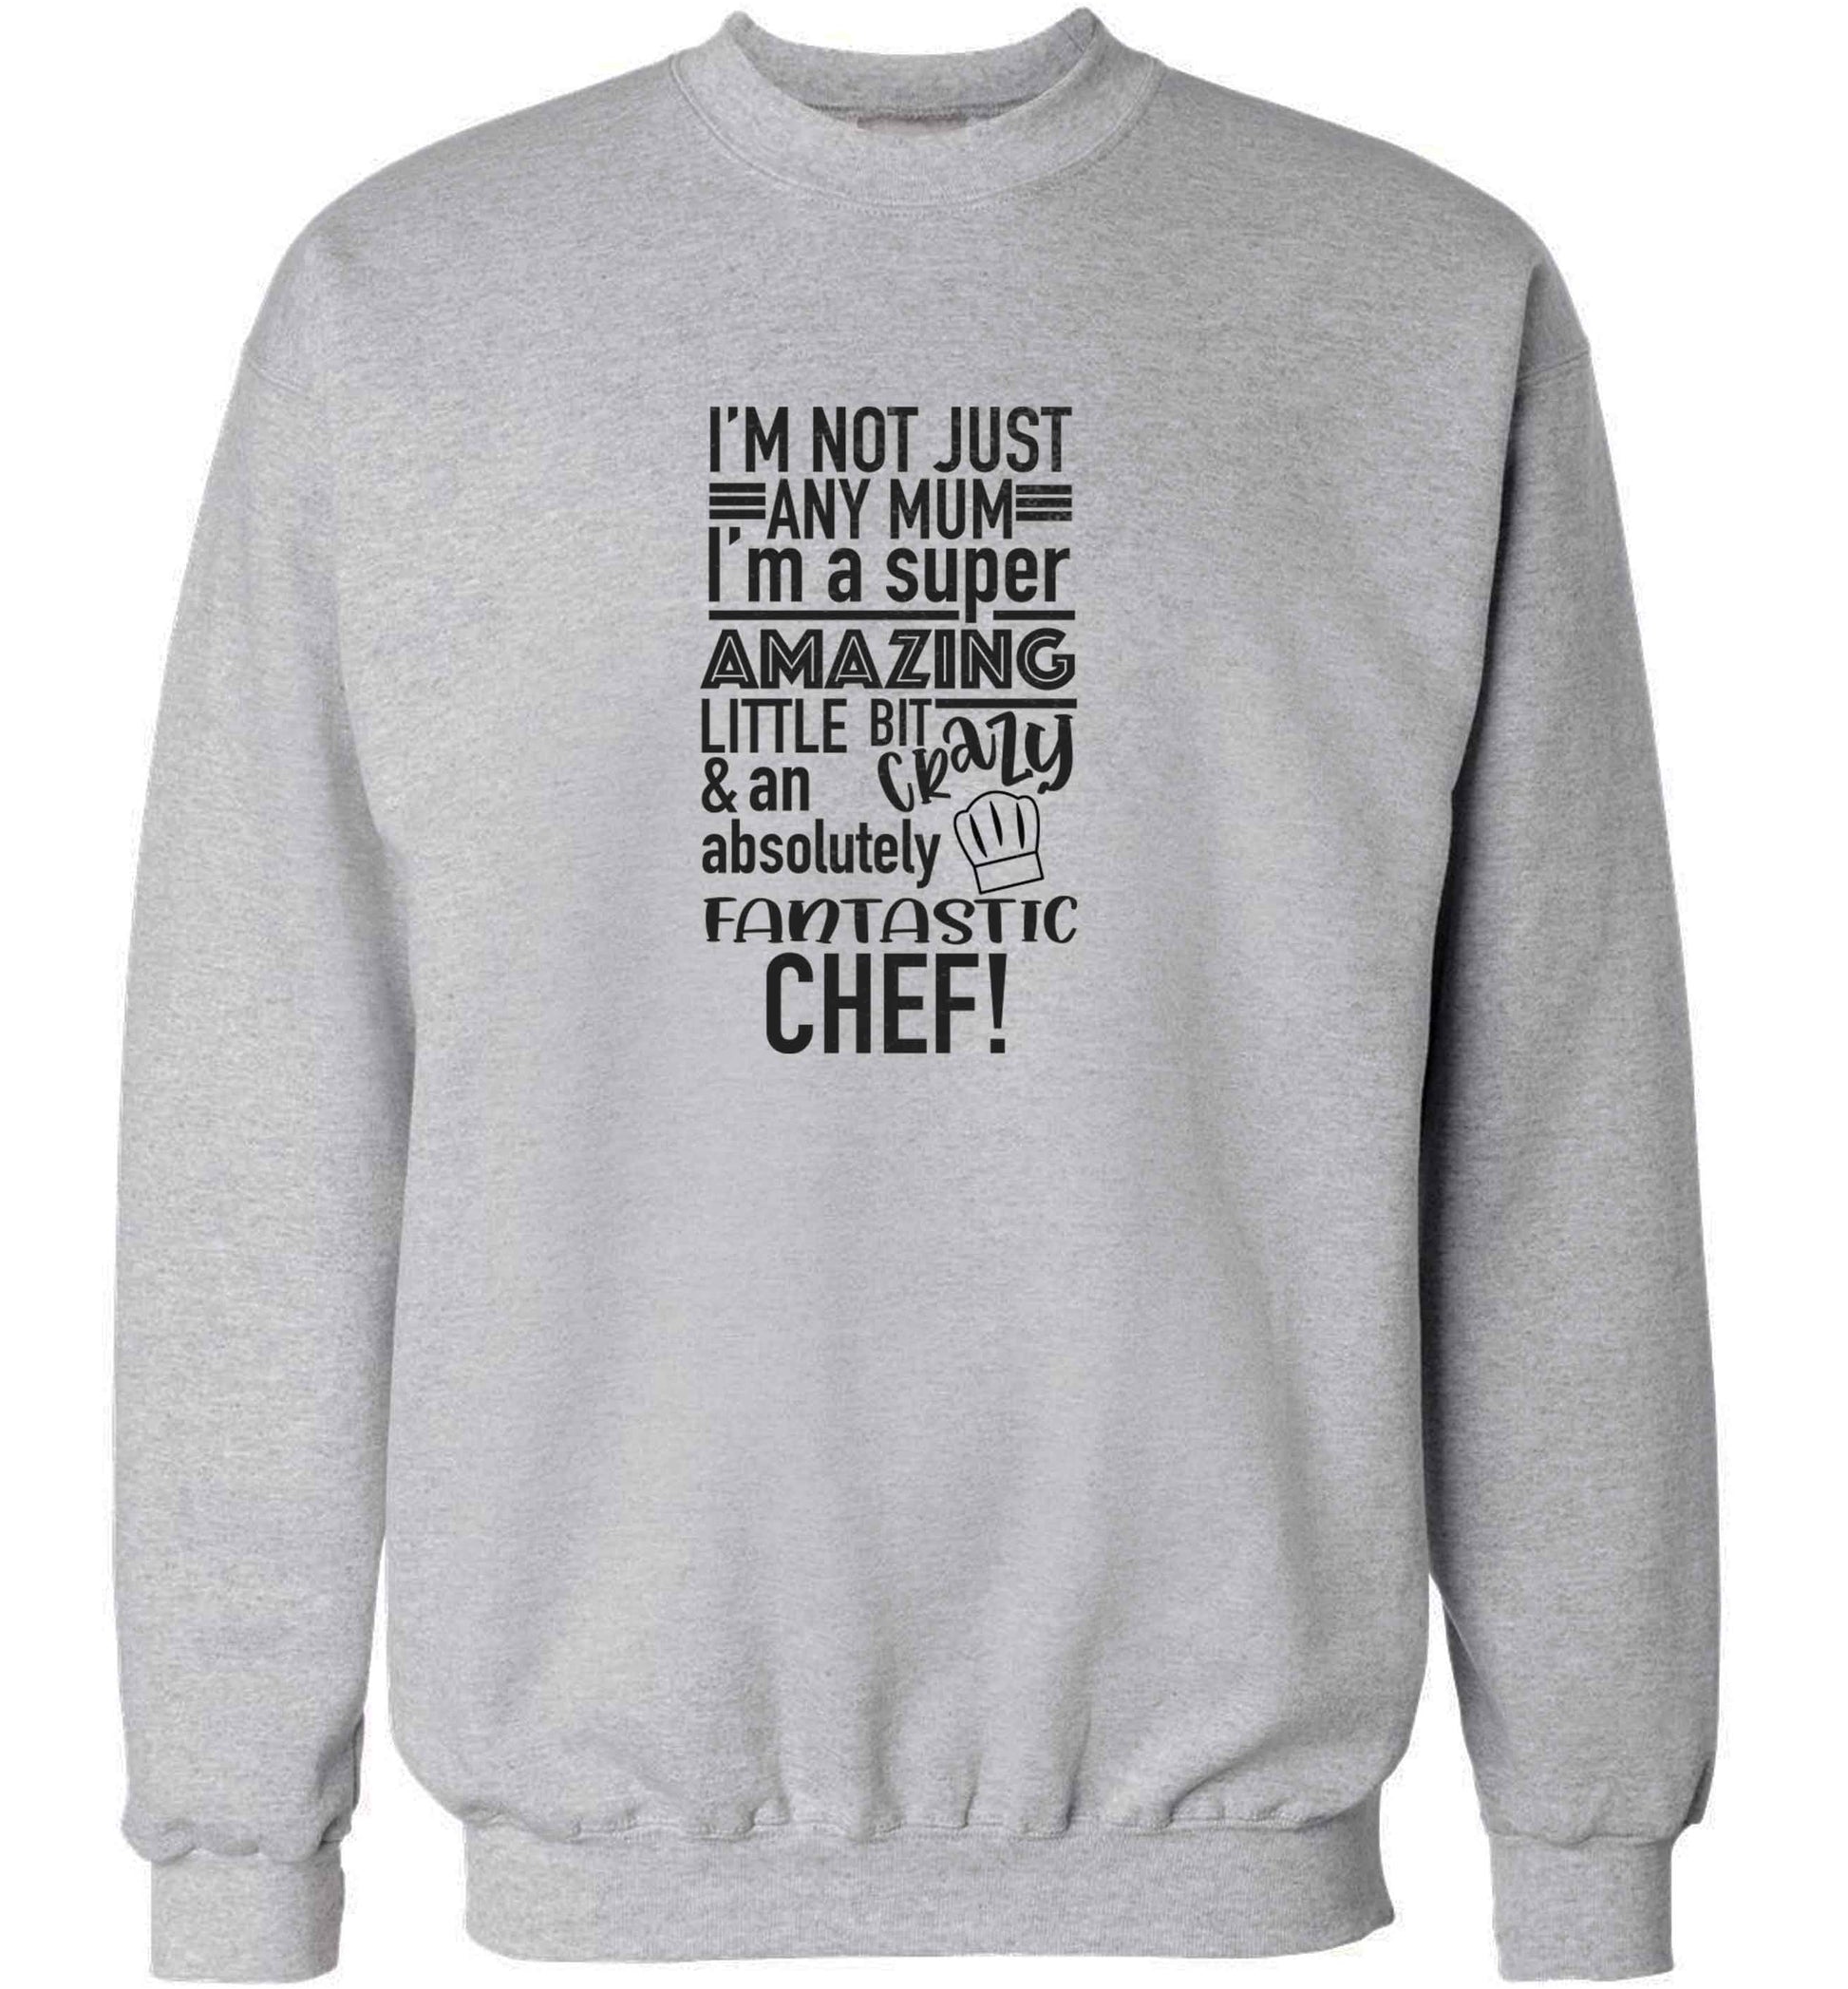 I'm not just any mum I'm a super amazing little bit crazy and an absolutely fantastic chef! adult's unisex grey sweater 2XL